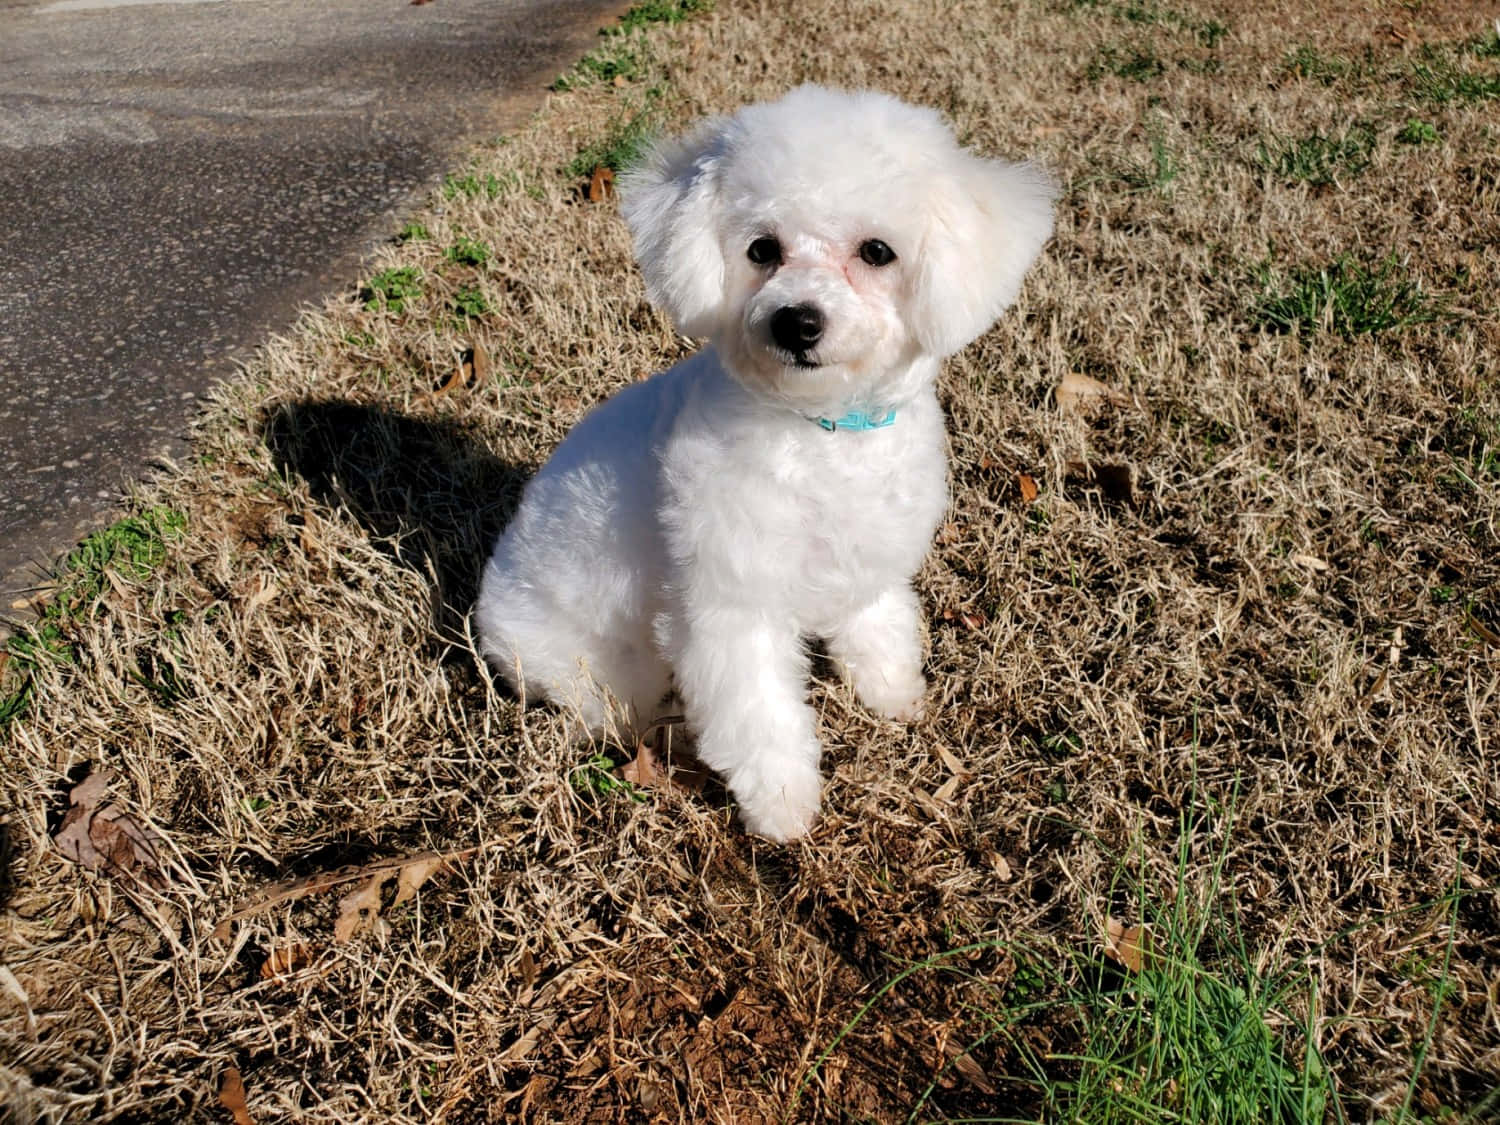 A cheerful Bichon Frise taking in the sights of the great outdoors